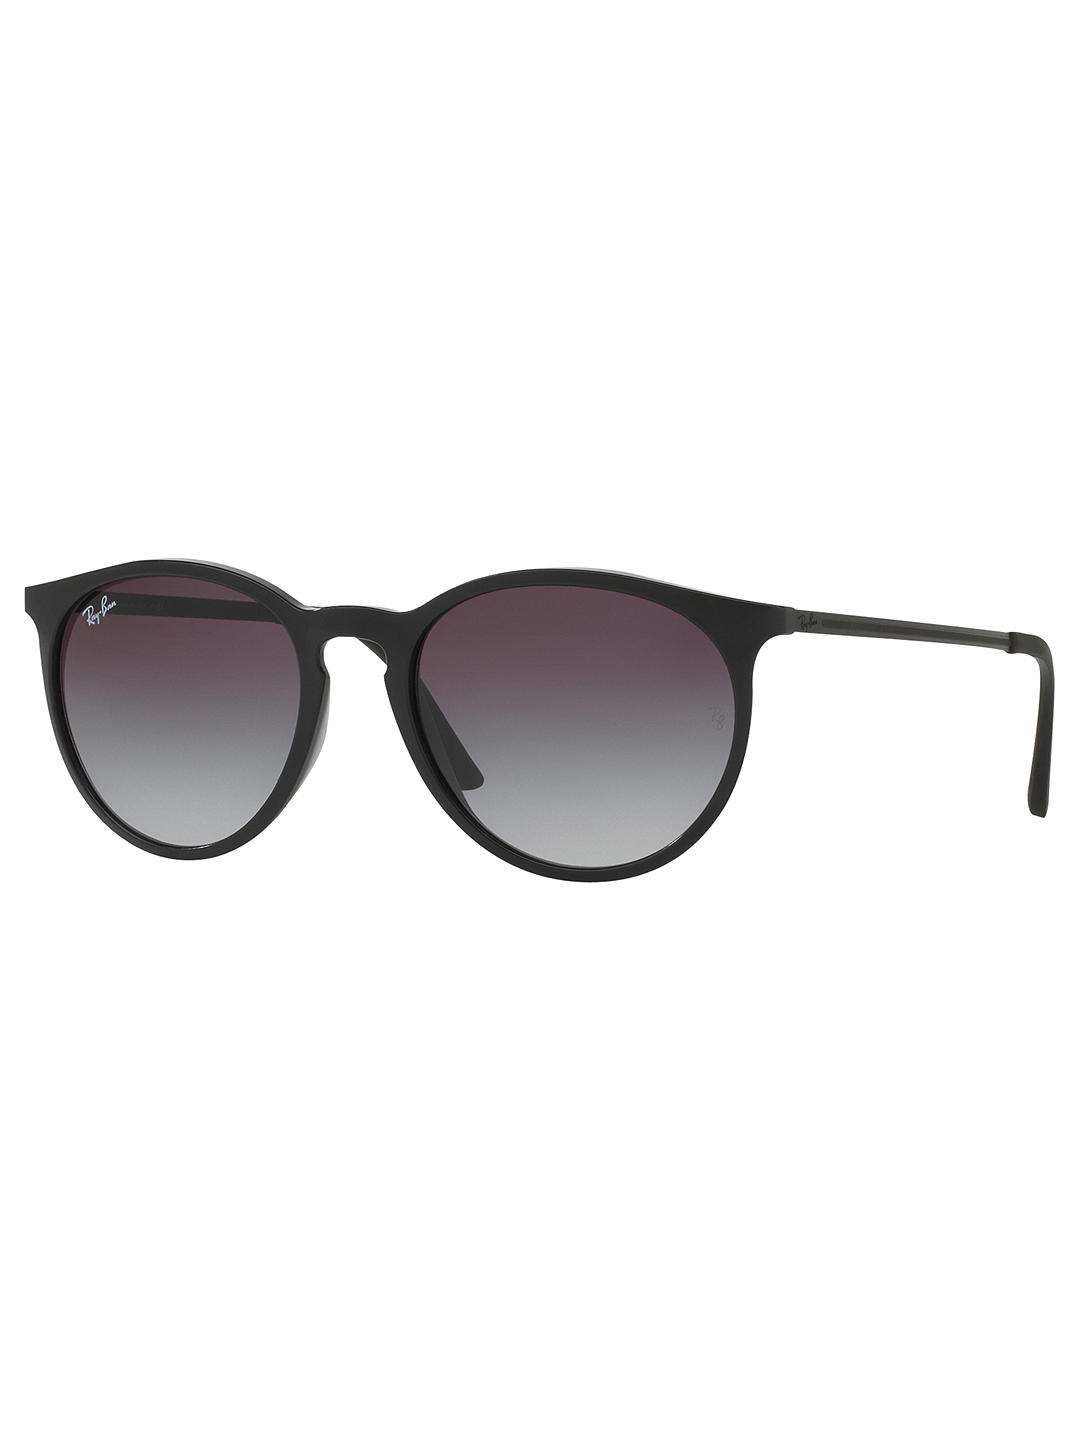 Ray-Ban RB4274 Oval Sunglasses, Black/Grey Gradient